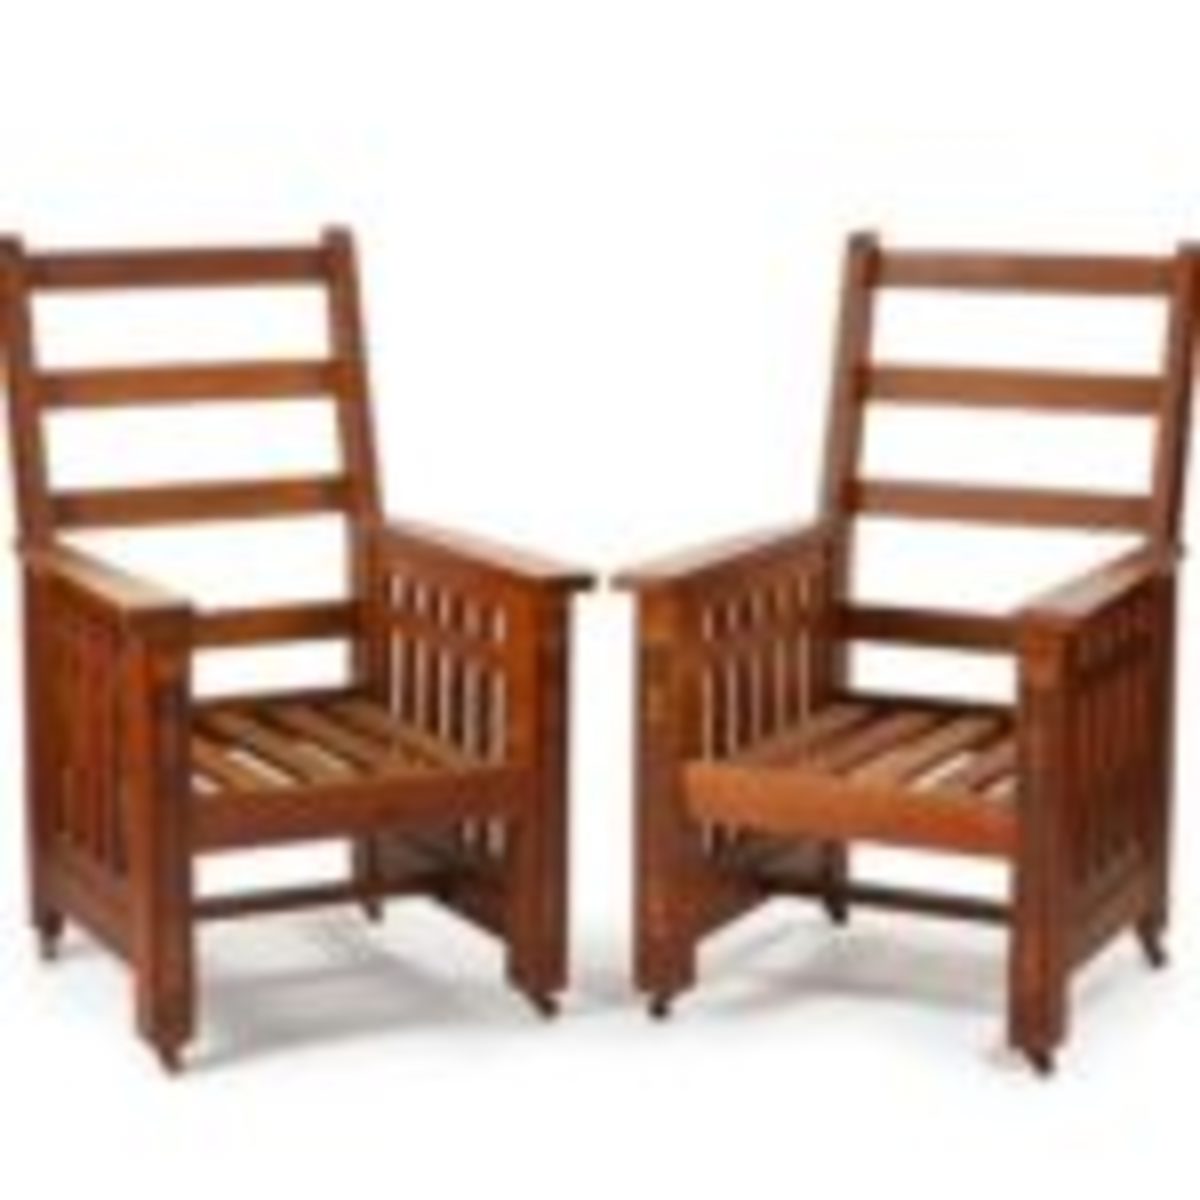 A pair of Shop of the Crafters “Mission Morris” chairs, circa 1910, $8,750.